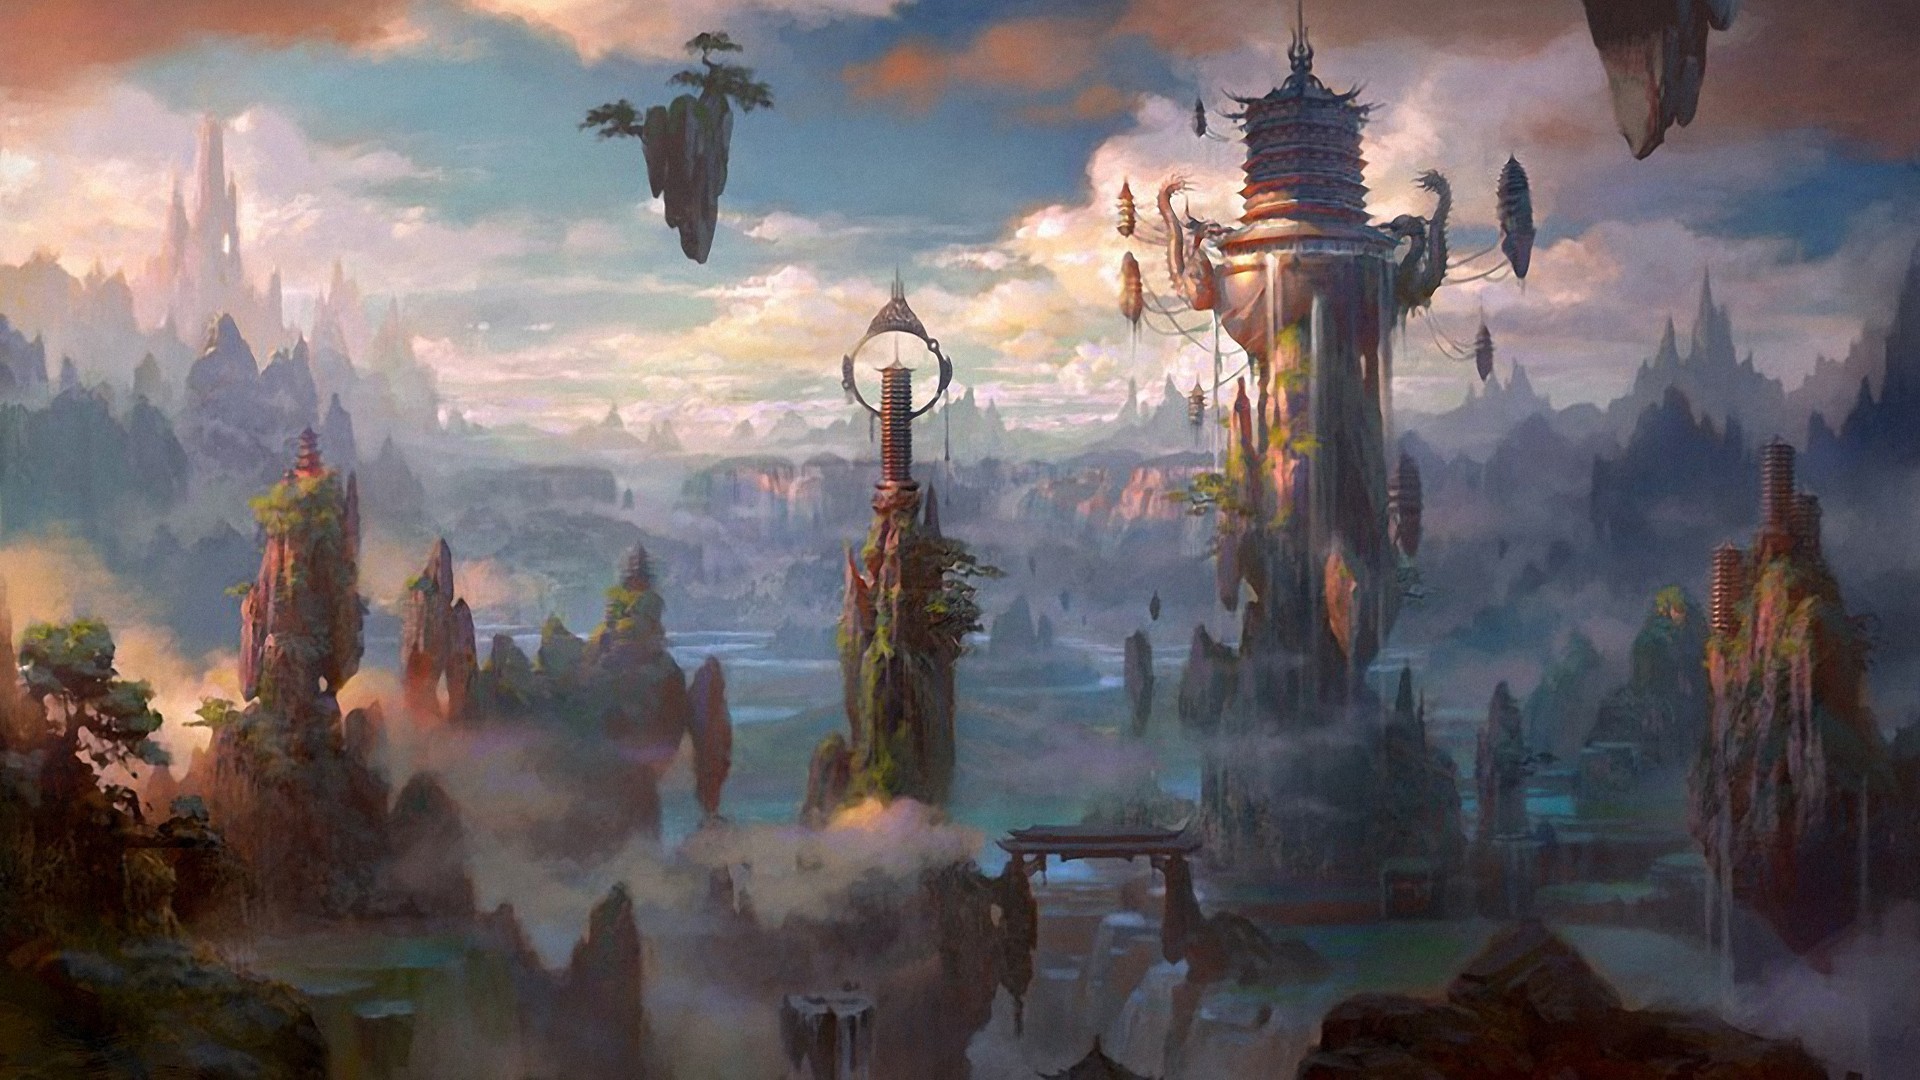 1920x1080 images of fantasy cities | Fantasy City Wallpaper/Background 1920 x 1080 -  Id: